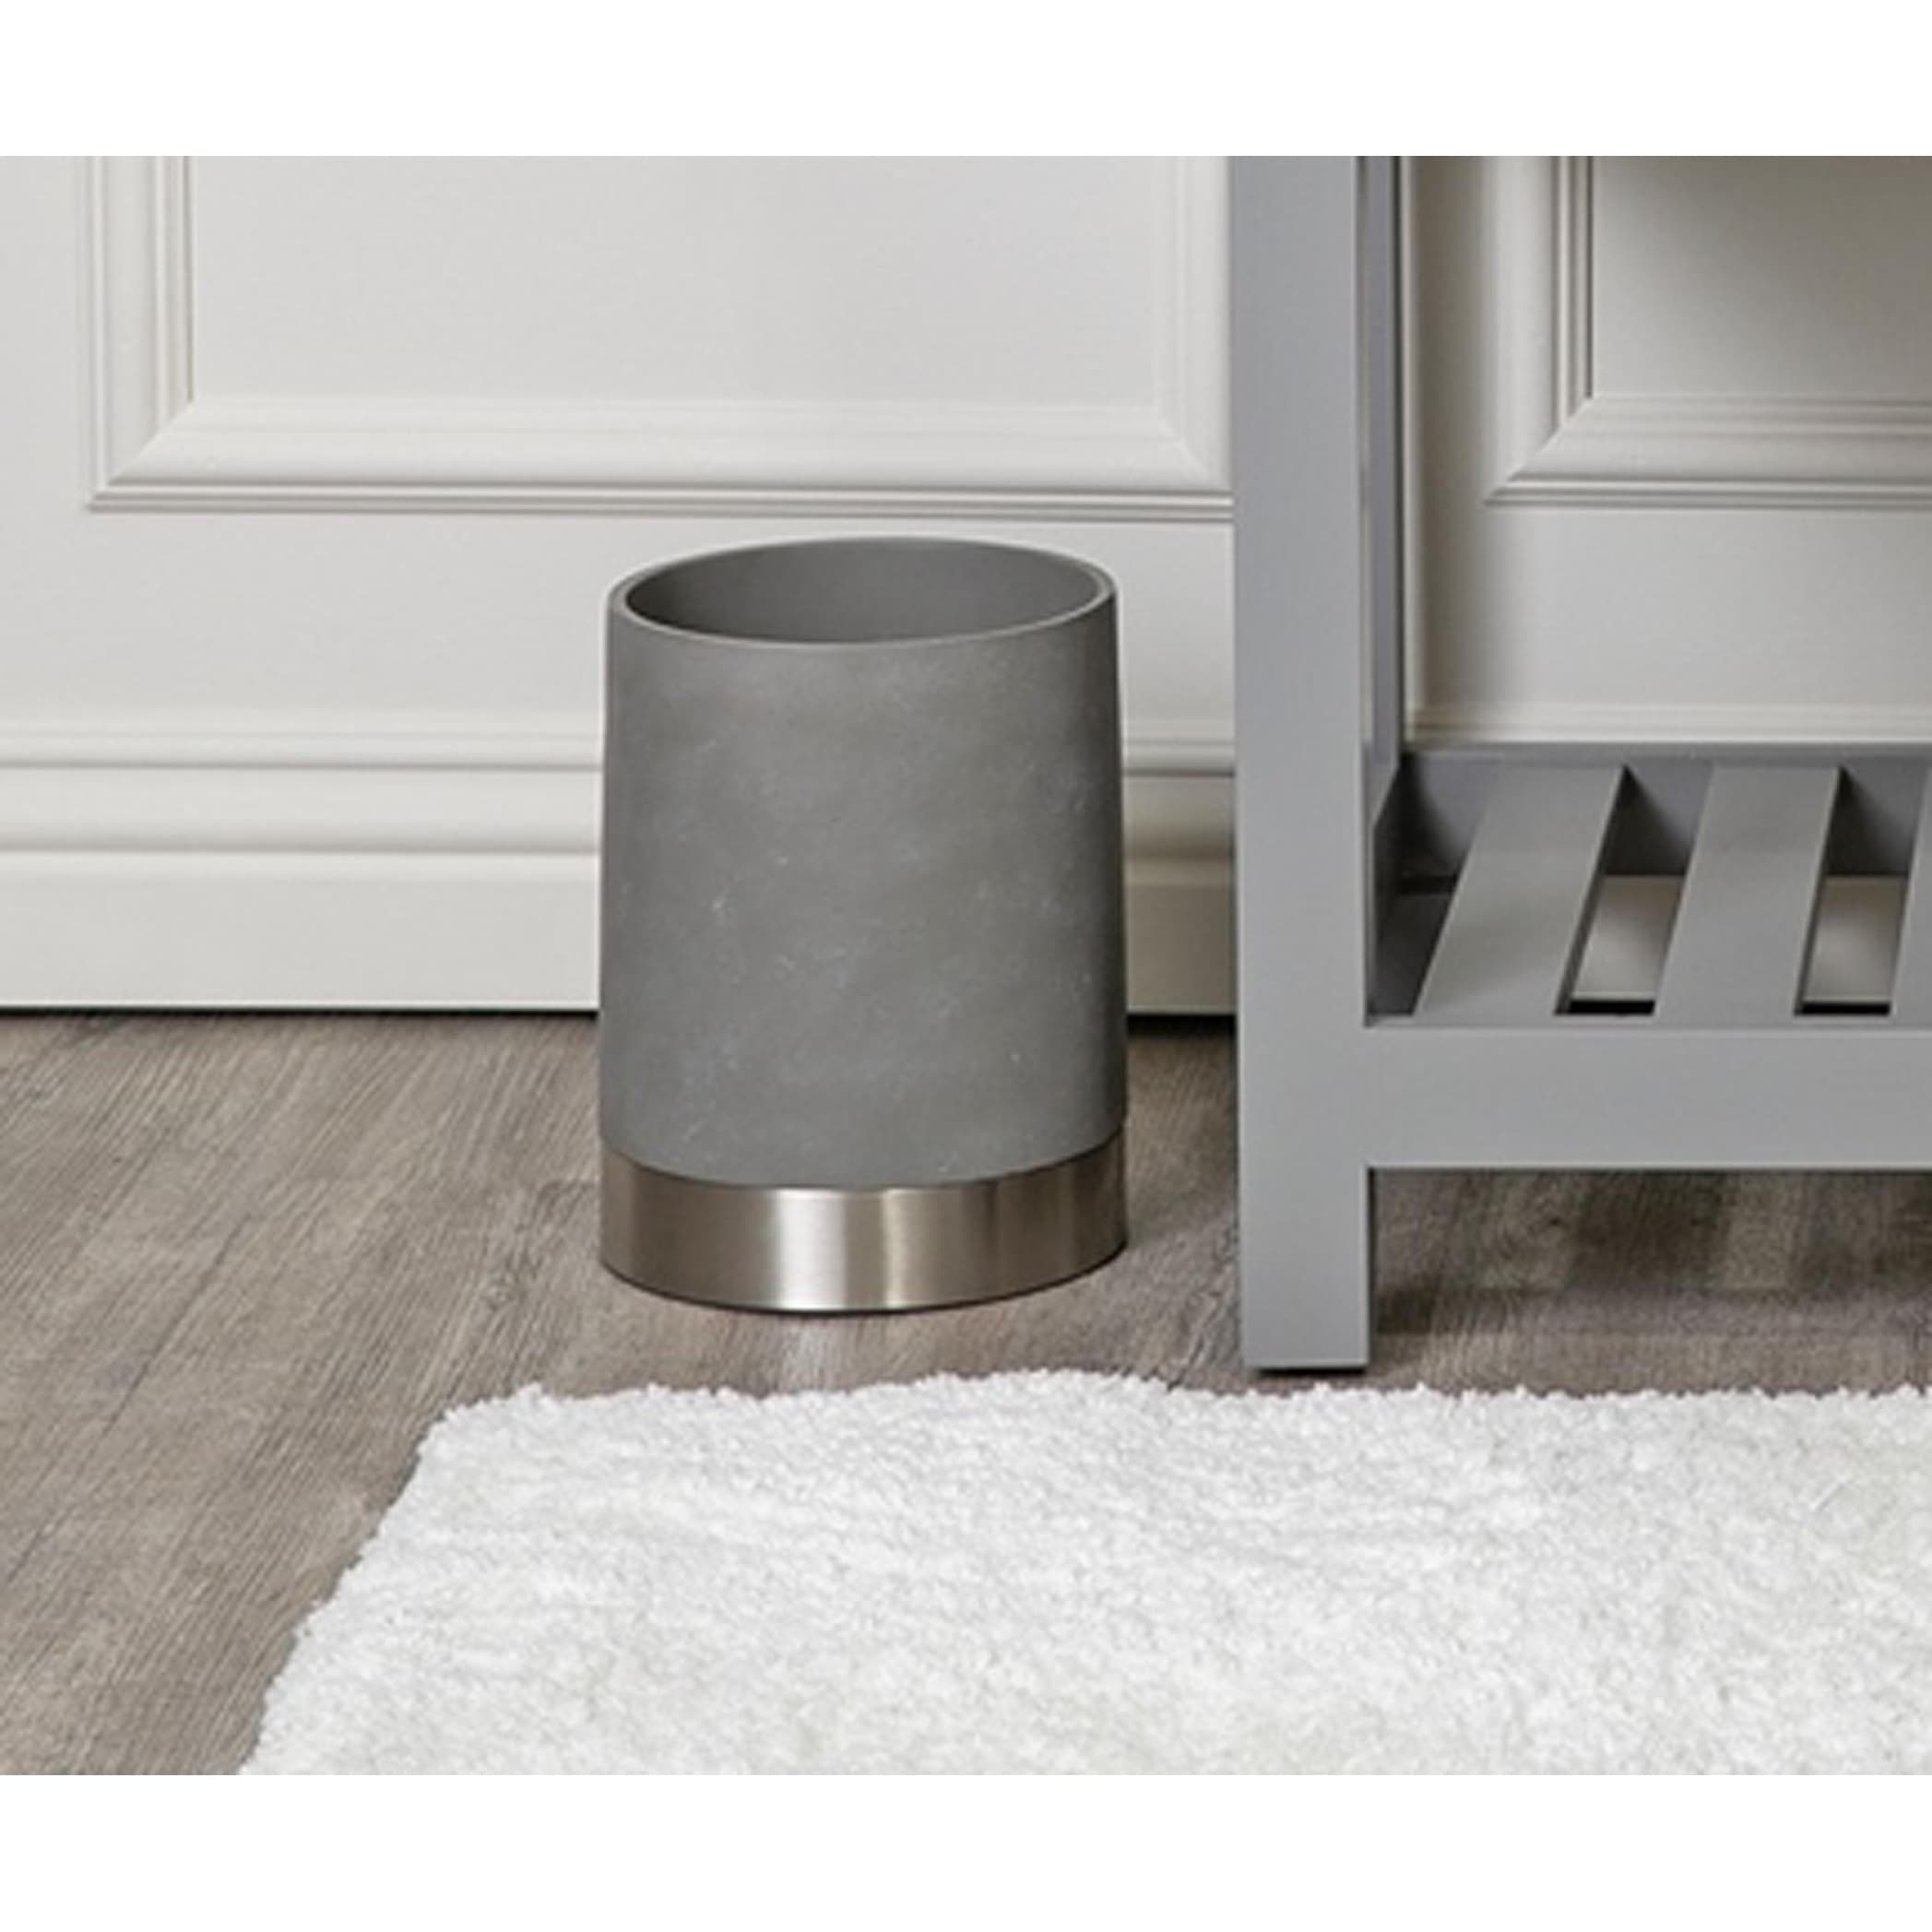 Shop For Concrete With Brushed Nickel Accent Wastebasket Get Free Delivery On Everything At Overstock Your Online Bathroom Accessories Store Get 5 In Rewards With Club O 29873755